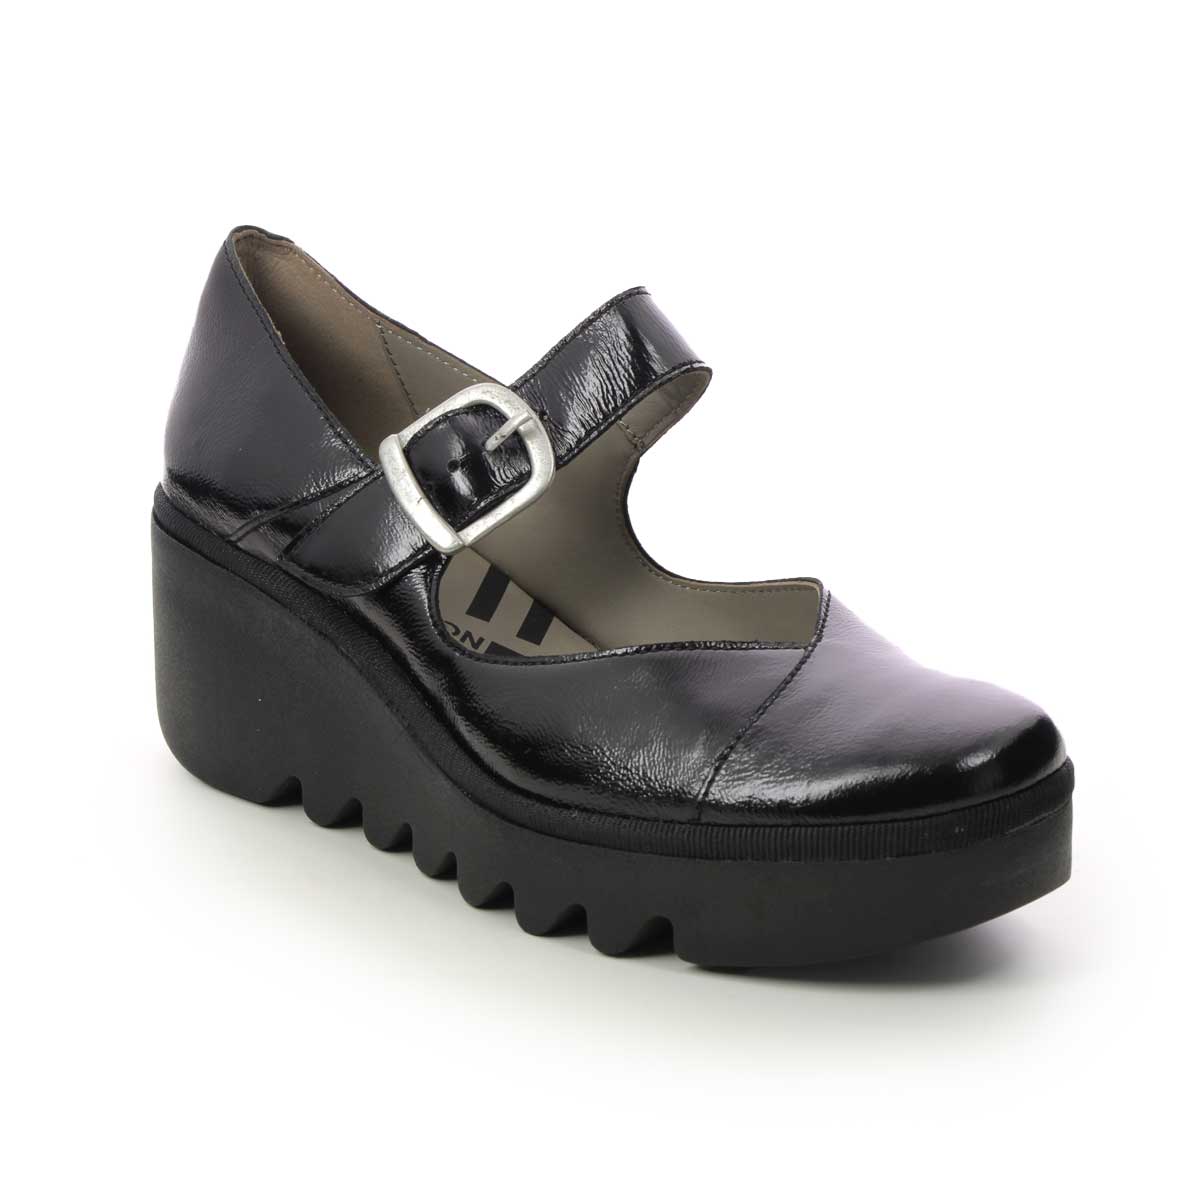 Fly London Baxe   Blu Lmj Black Patent Womens Wedge Shoes P501428 In Size 36 In Plain Black Patent